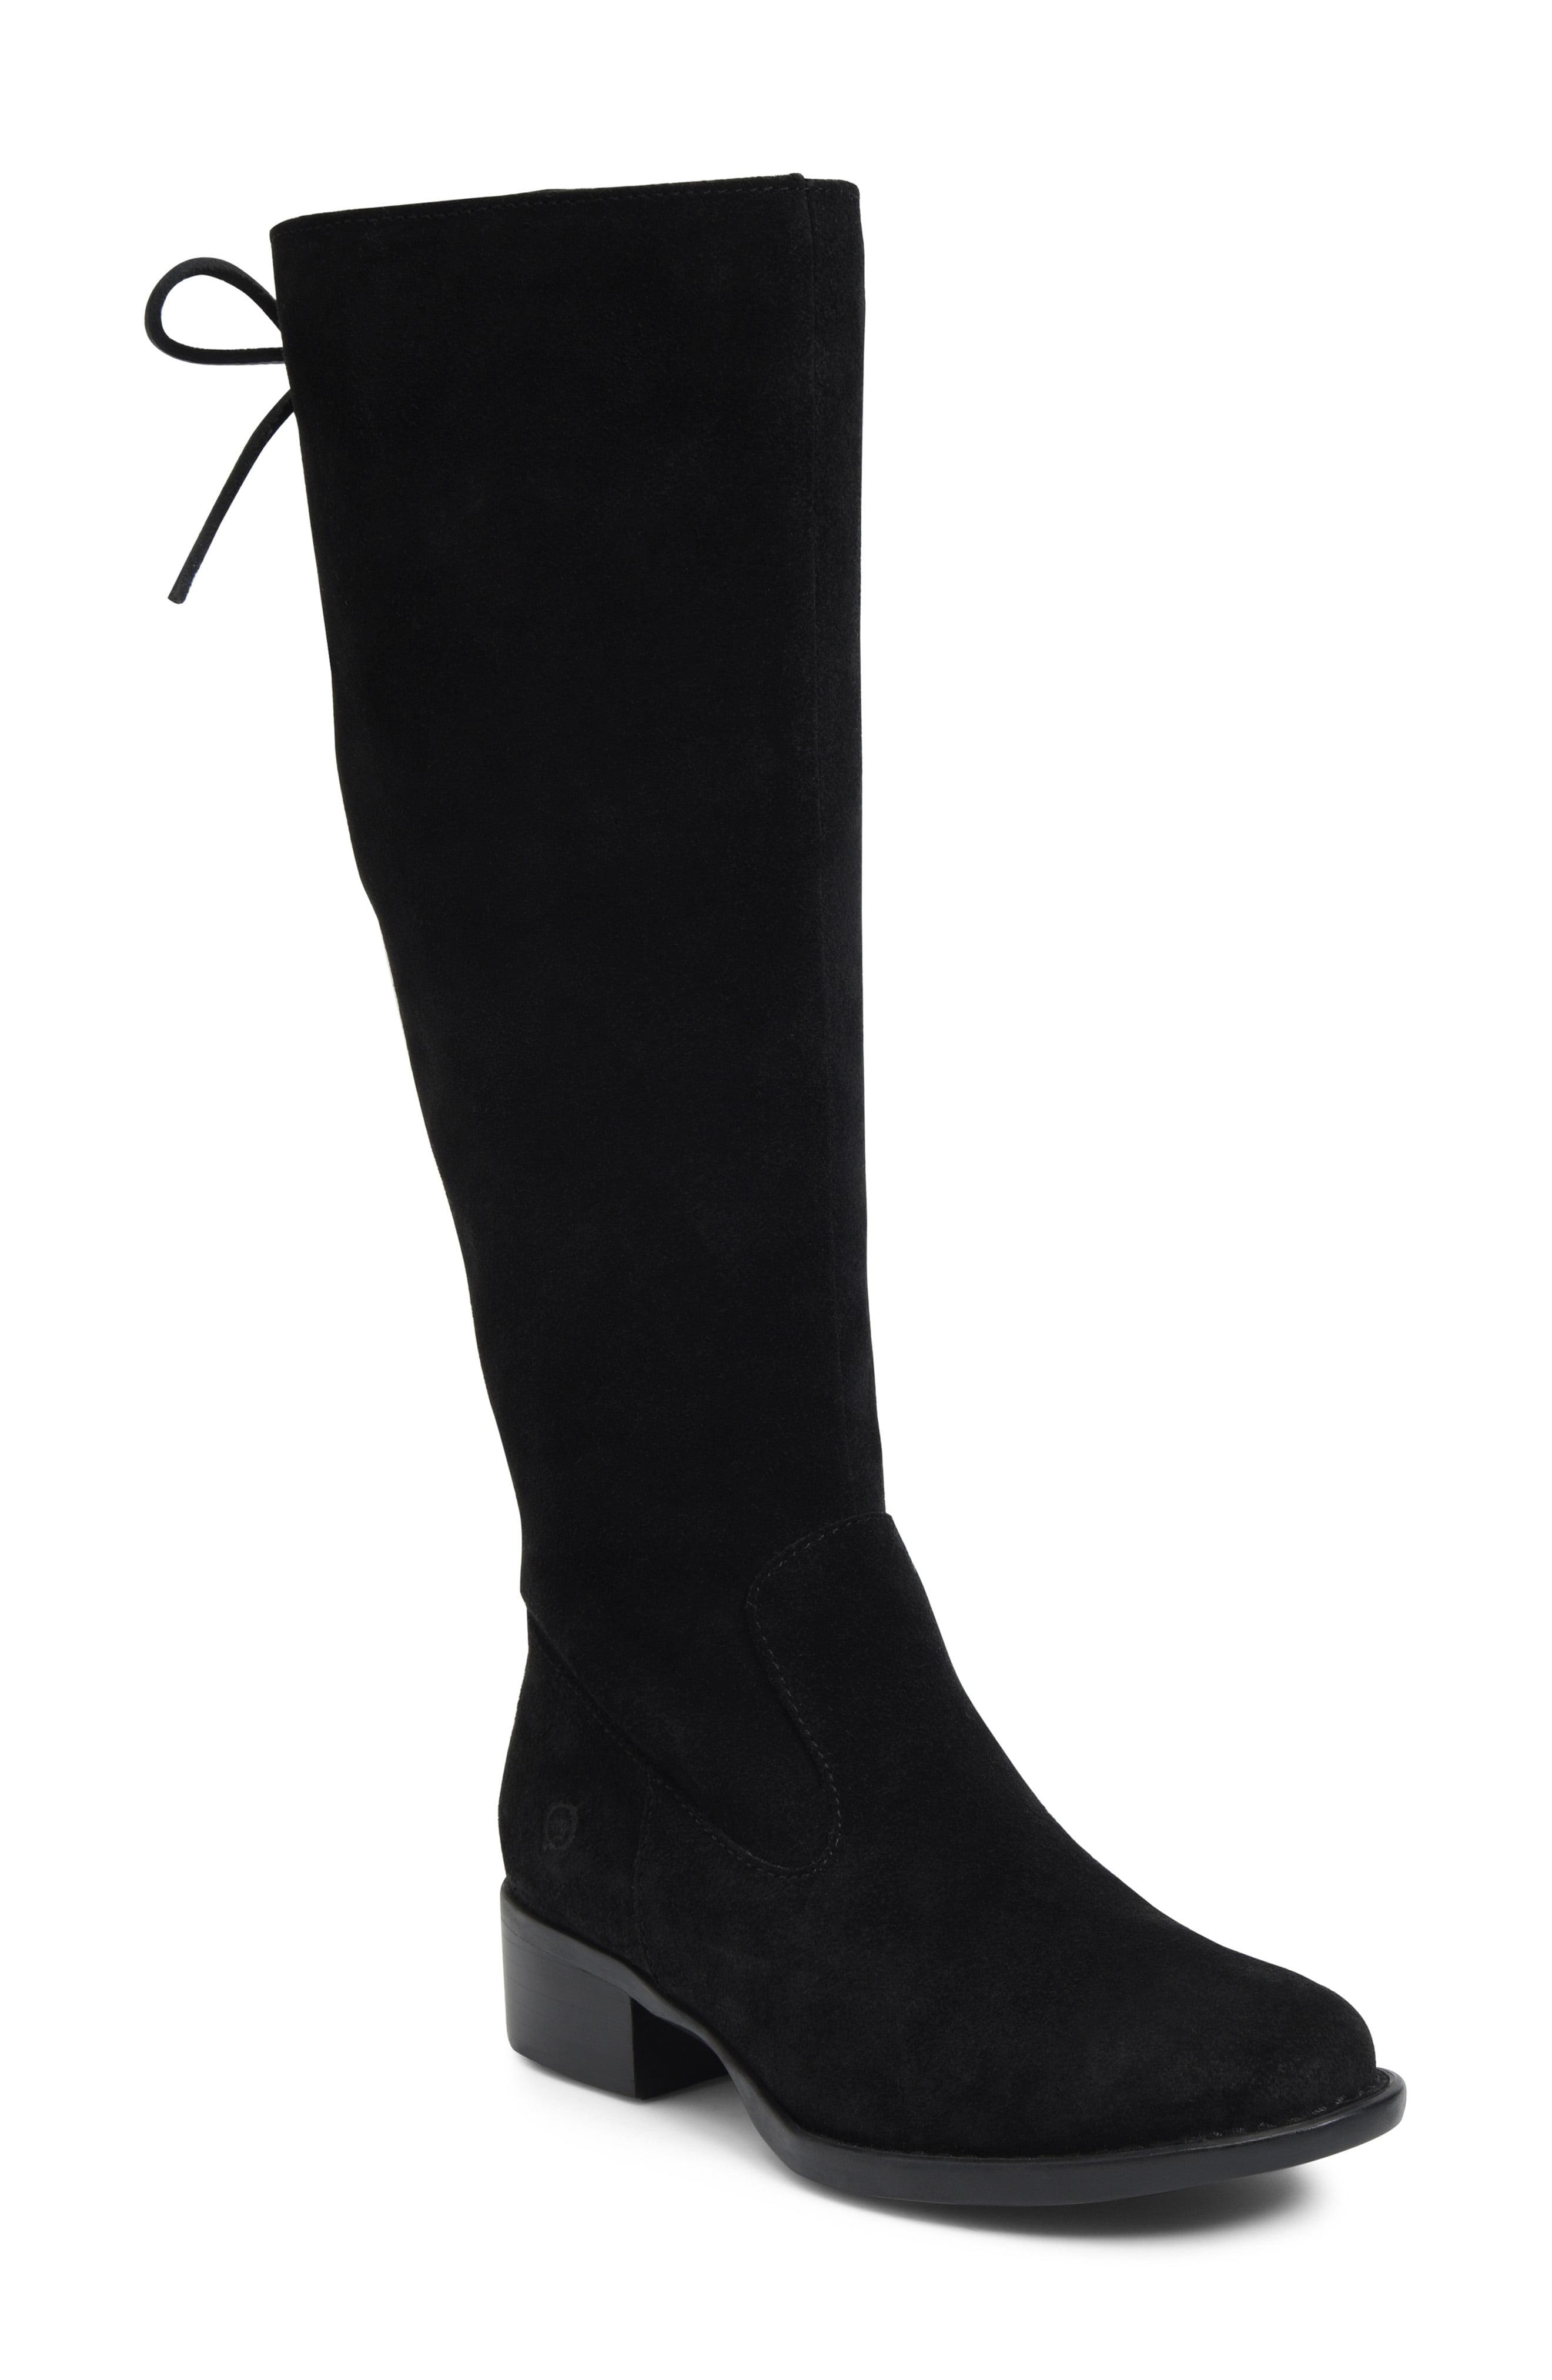 Born Børn Cotto Tall Boot in Black Suede (Black) - Save 28% - Lyst